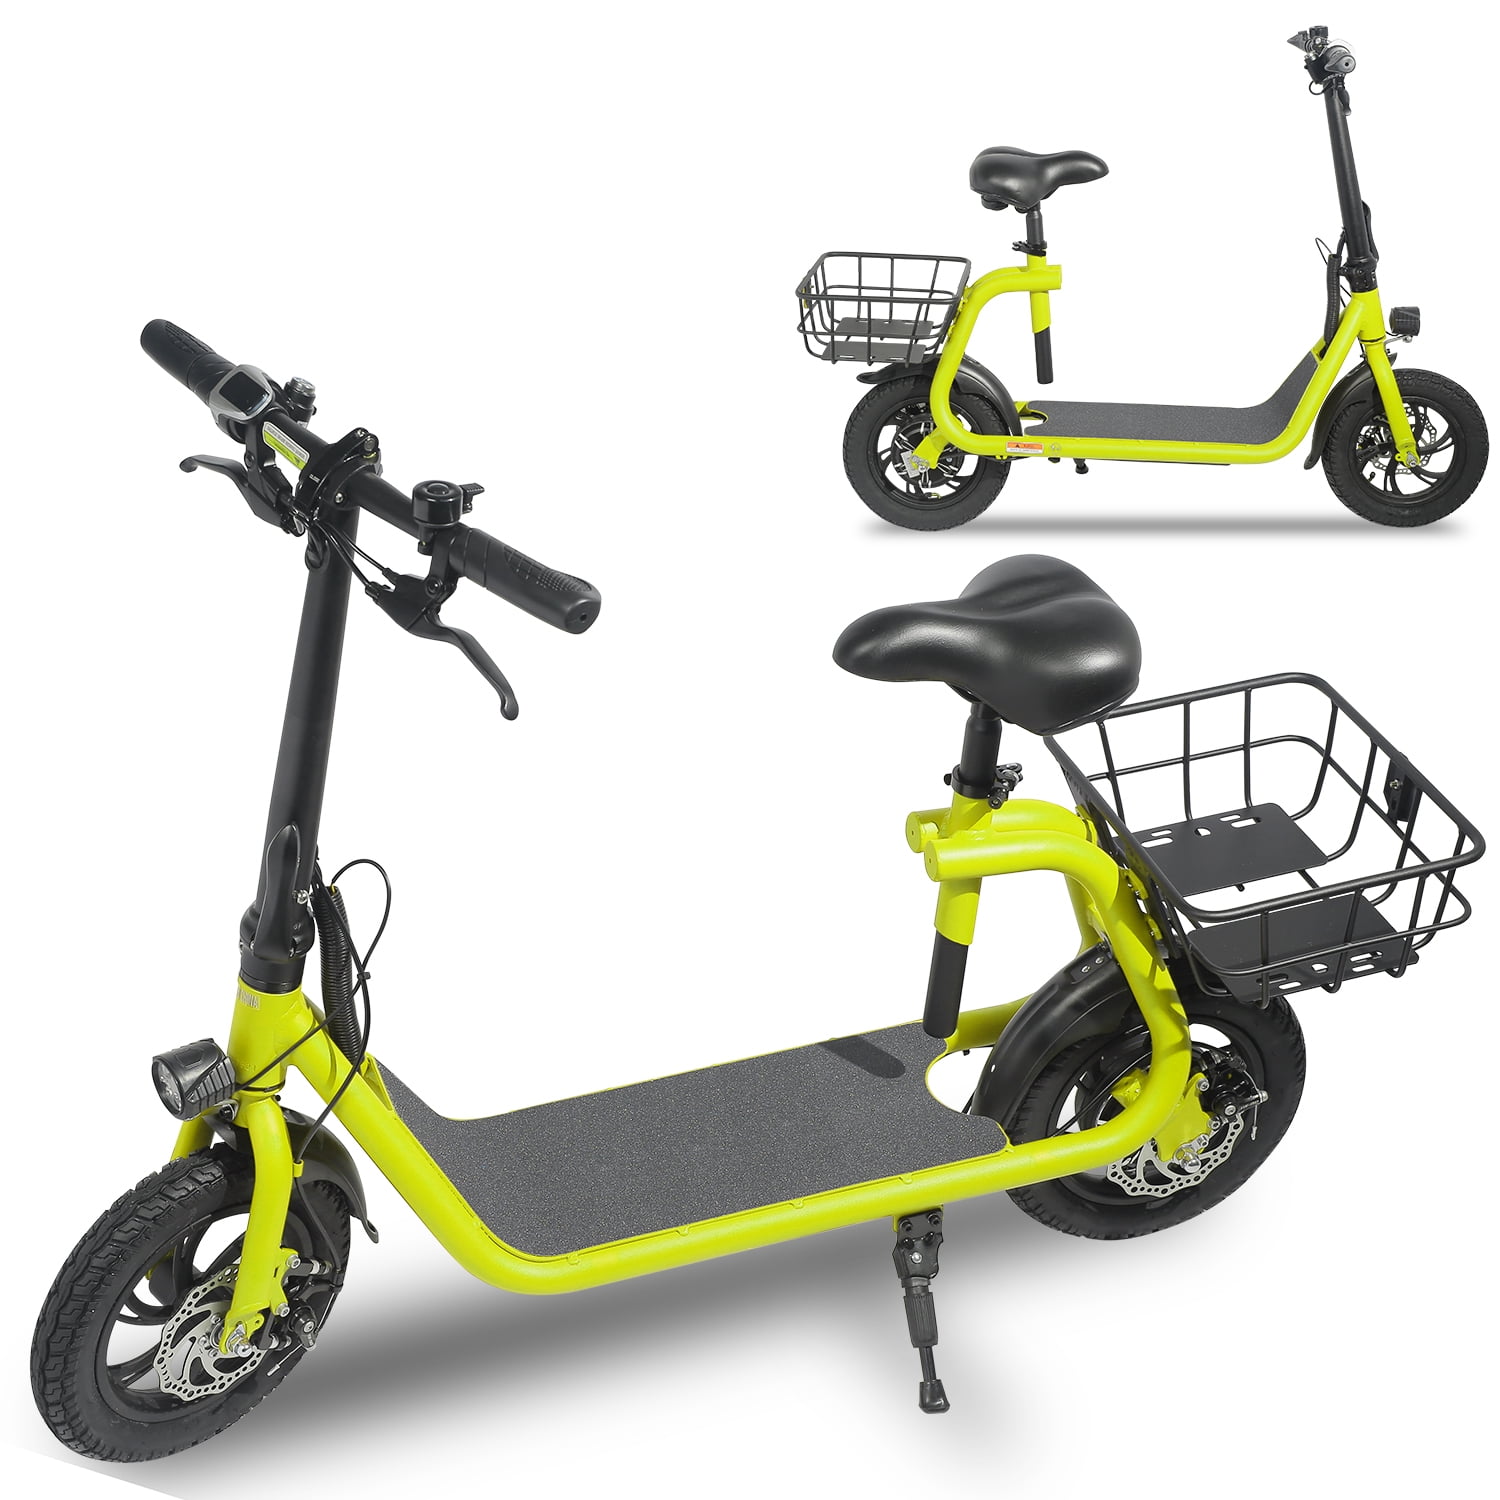 Commuter R1 - Electric Scooter for Adults - Foldable with Seat & Carry Basket - 450W Brushless Motor 36V - 15MPH 265lbs Max Load E Mopeds for Adults - Walmart.com